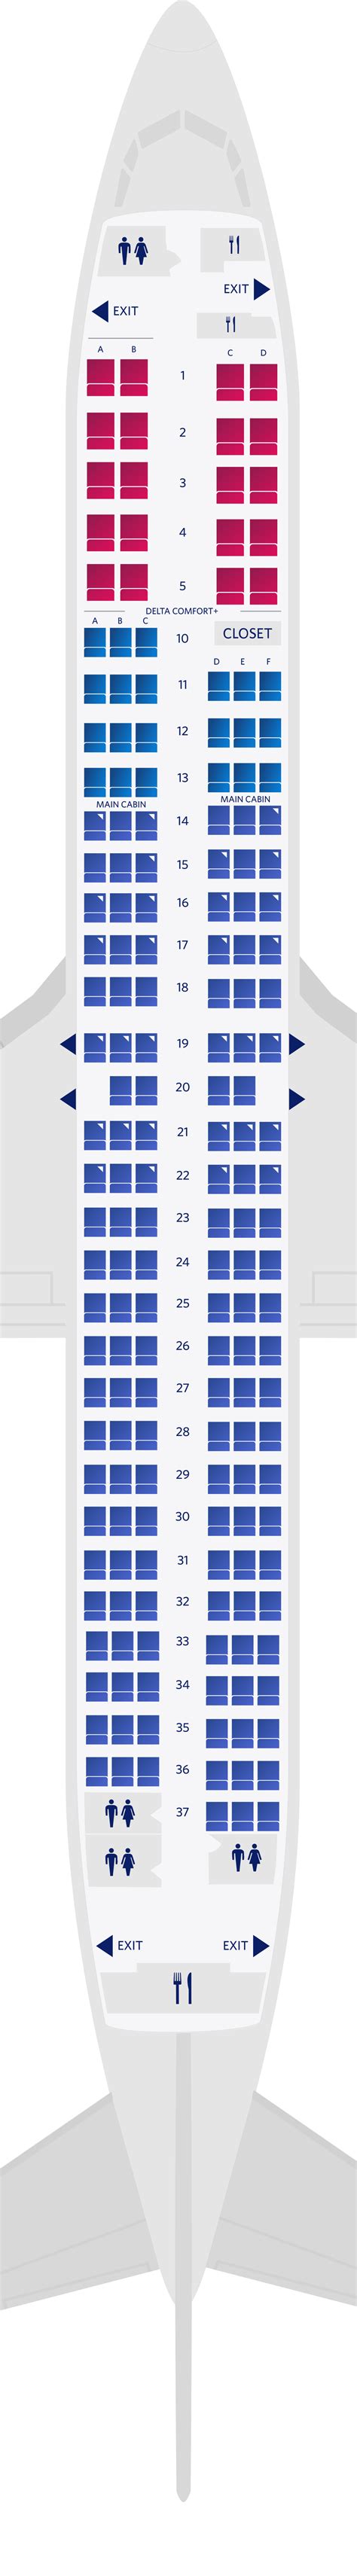 Food & Snacks. Seat 5C is a standard first class aisle seat with 37" of seat pitch, which is average across Boeing 737-900's worldwide. 5C is has a bulkhead behind it, which means there's nobody behind you to bump or kick your seat, but your seat recline may be slightly limited.. 